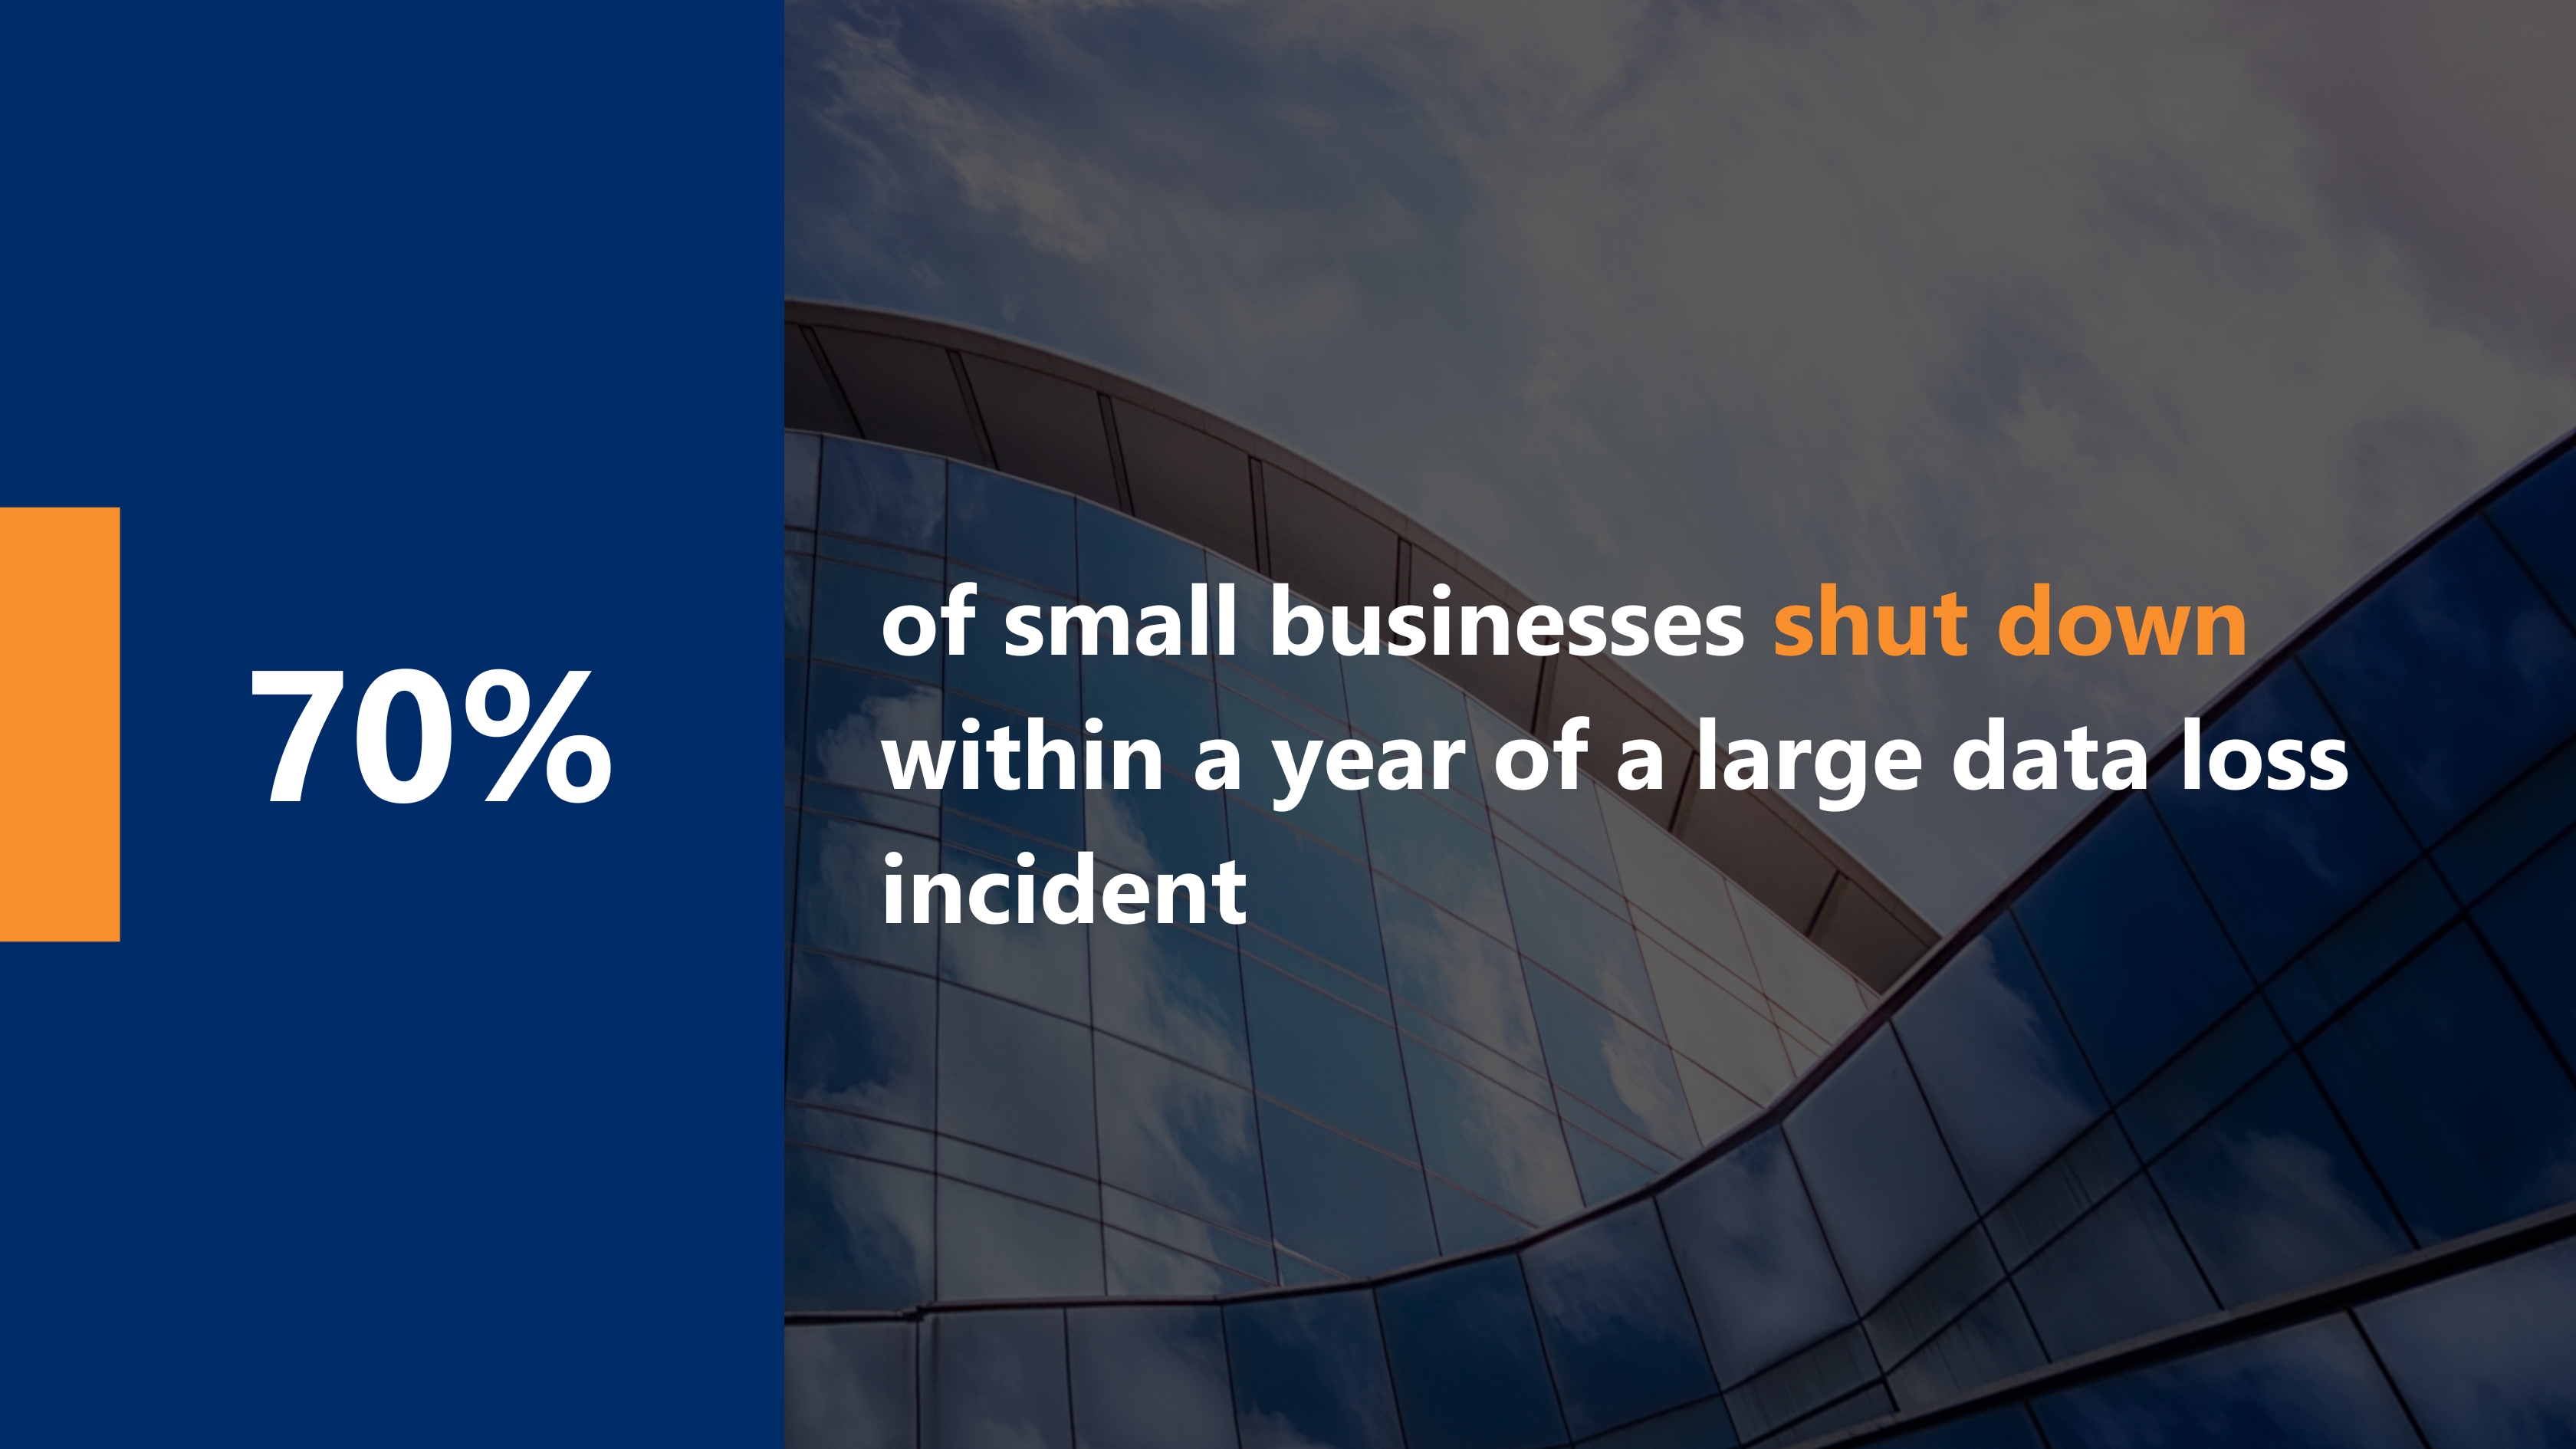 70% of small businesses shut down after a year from large data loss incidents